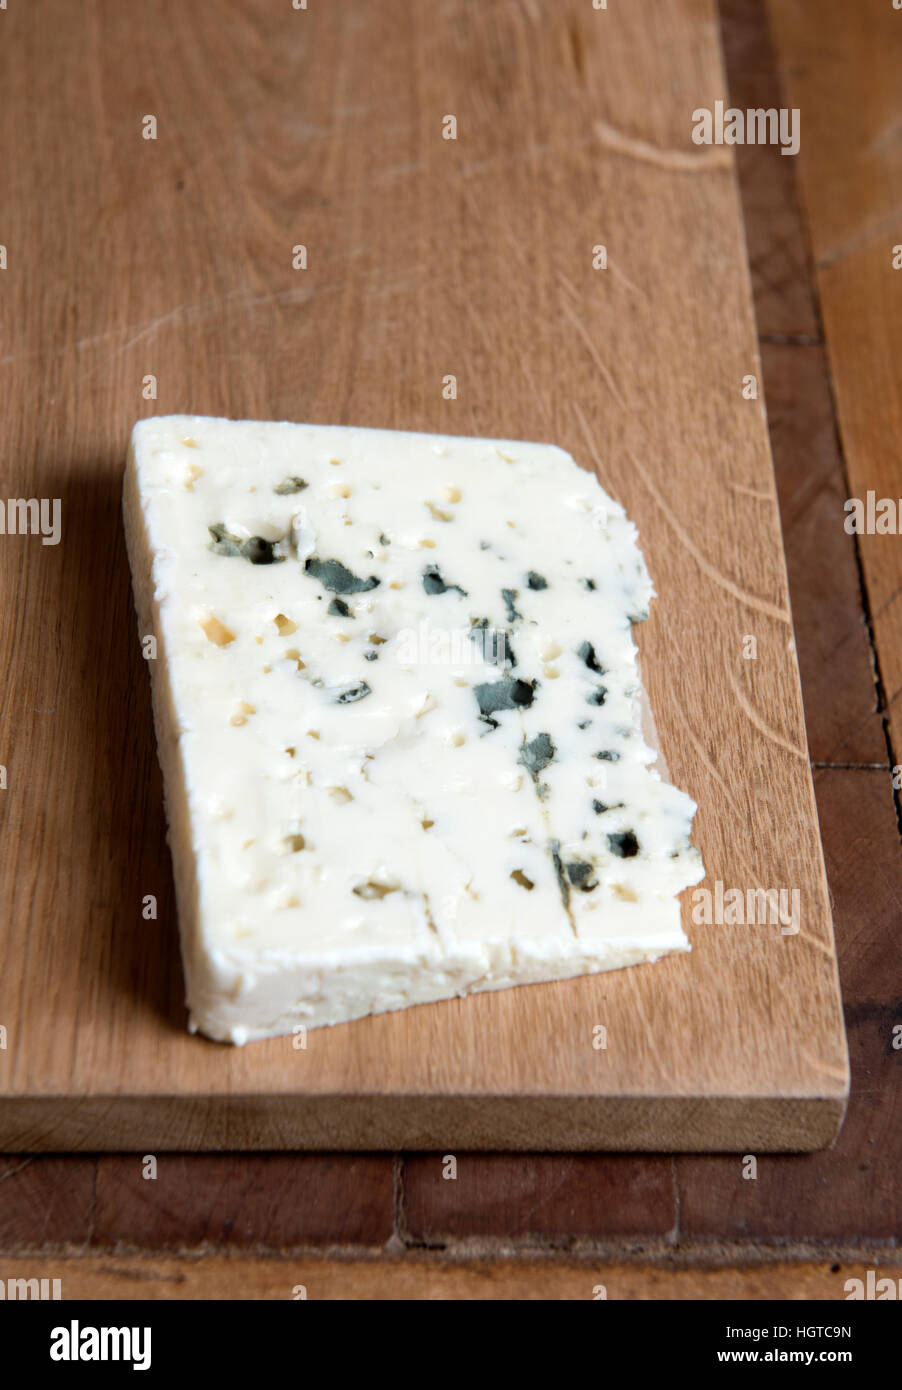 A wedge of French Blue cheese Stock Photo